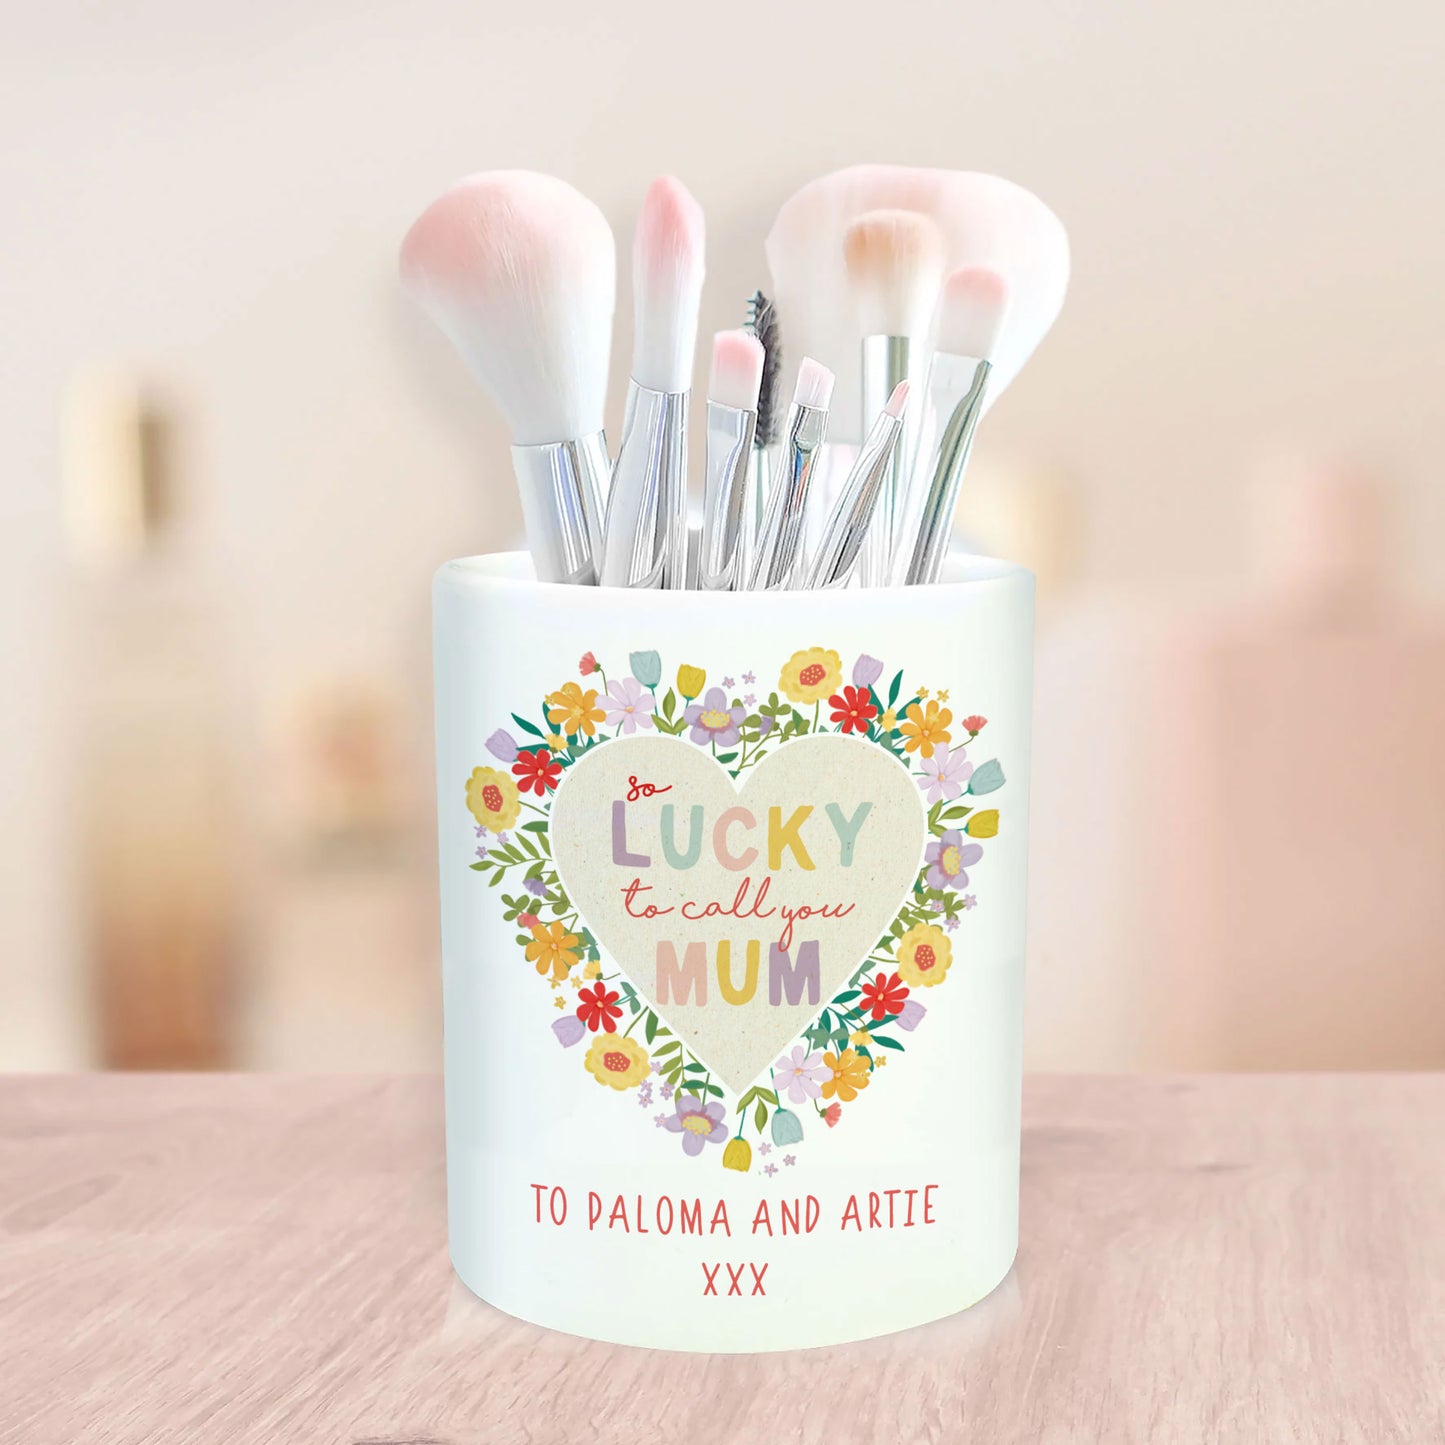 So Lovely To Call You Mum Brush Pot. Personalised Make Up Pot holder. Personalised Gift For Mum.